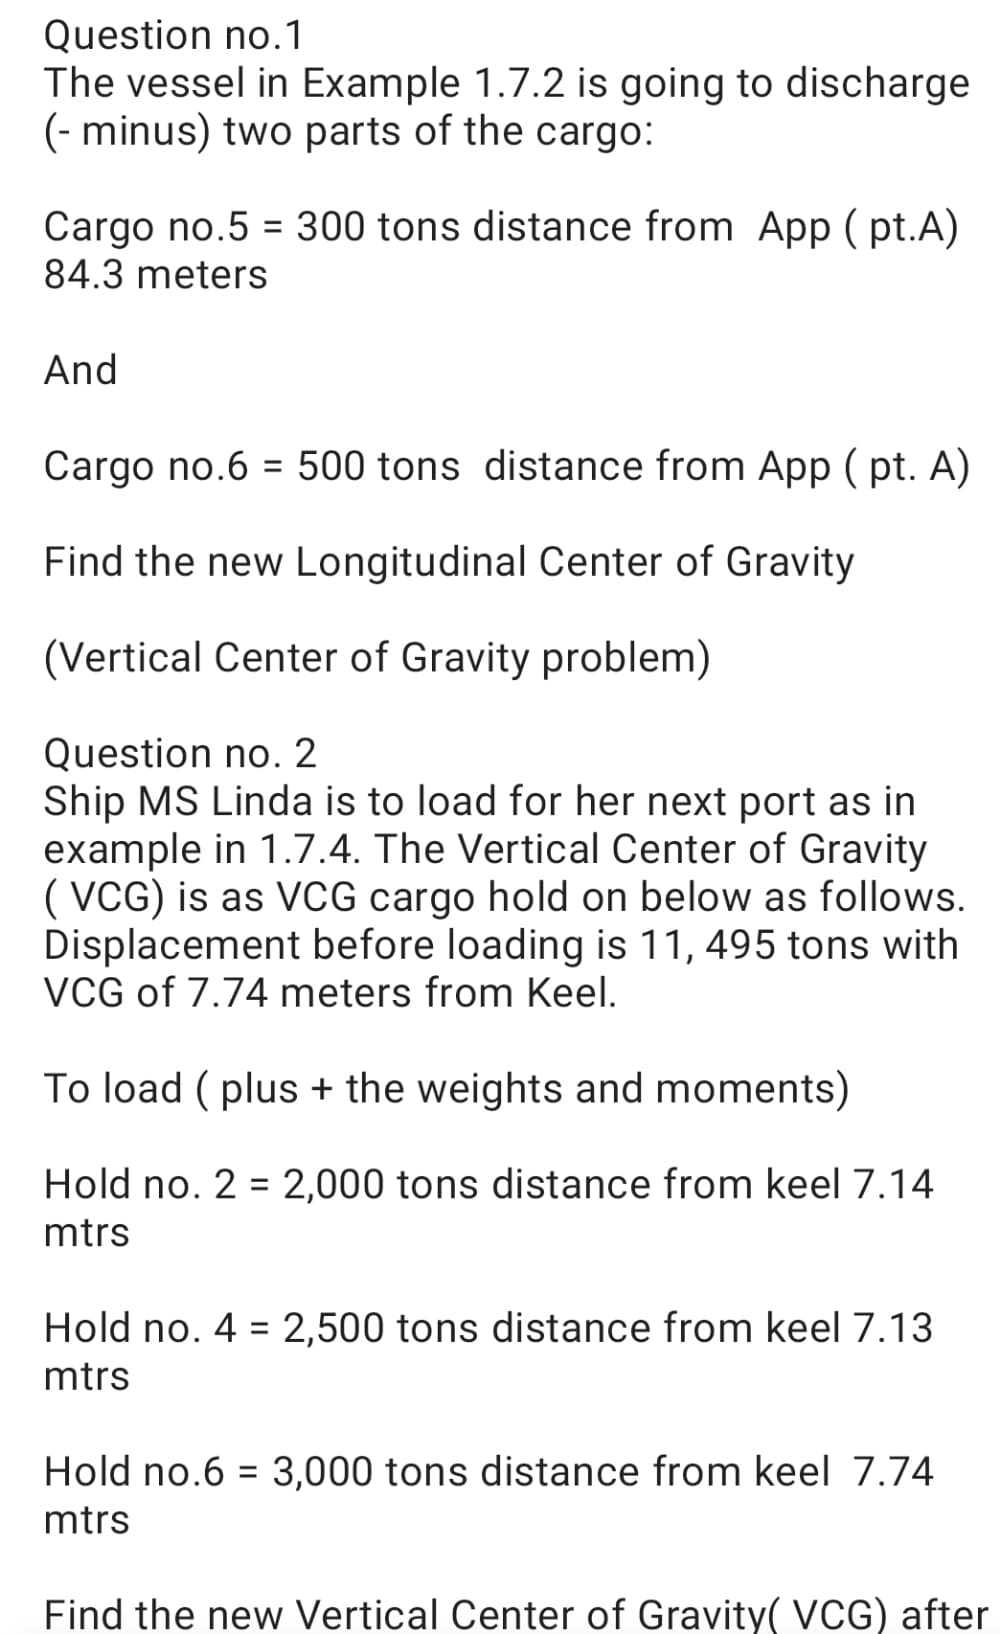 Question no.1
The vessel in Example 1.7.2 is going to discharge
(- minus) two parts of the cargo:
Cargo no.5 = 300 tons distance from App ( pt.A)
84.3 meters
And
Cargo no.6 = 500 tons distance from App ( pt. A)
%3D
Find the new Longitudinal Center of Gravity
(Vertical Center of Gravity problem)
Question no. 2
Ship MS Linda is to load for her next port as in
example in 1.7.4. The Vertical Center of Gravity
( VCG) is as VCG cargo hold on below as follows.
Displacement before loading is 11, 495 tons with
VCG of 7.74 meters from Keel.
To load ( plus + the weights and moments)
Hold no. 2 = 2,000 tons distance from keel 7.14
%3D
mtrs
Hold no. 4 = 2,500 tons distance from keel 7.13
mtrs
Hold no.6 = 3,000 tons distance from keel 7.74
mtrs
Find the new Vertical Center of Gravity( VCG) after
